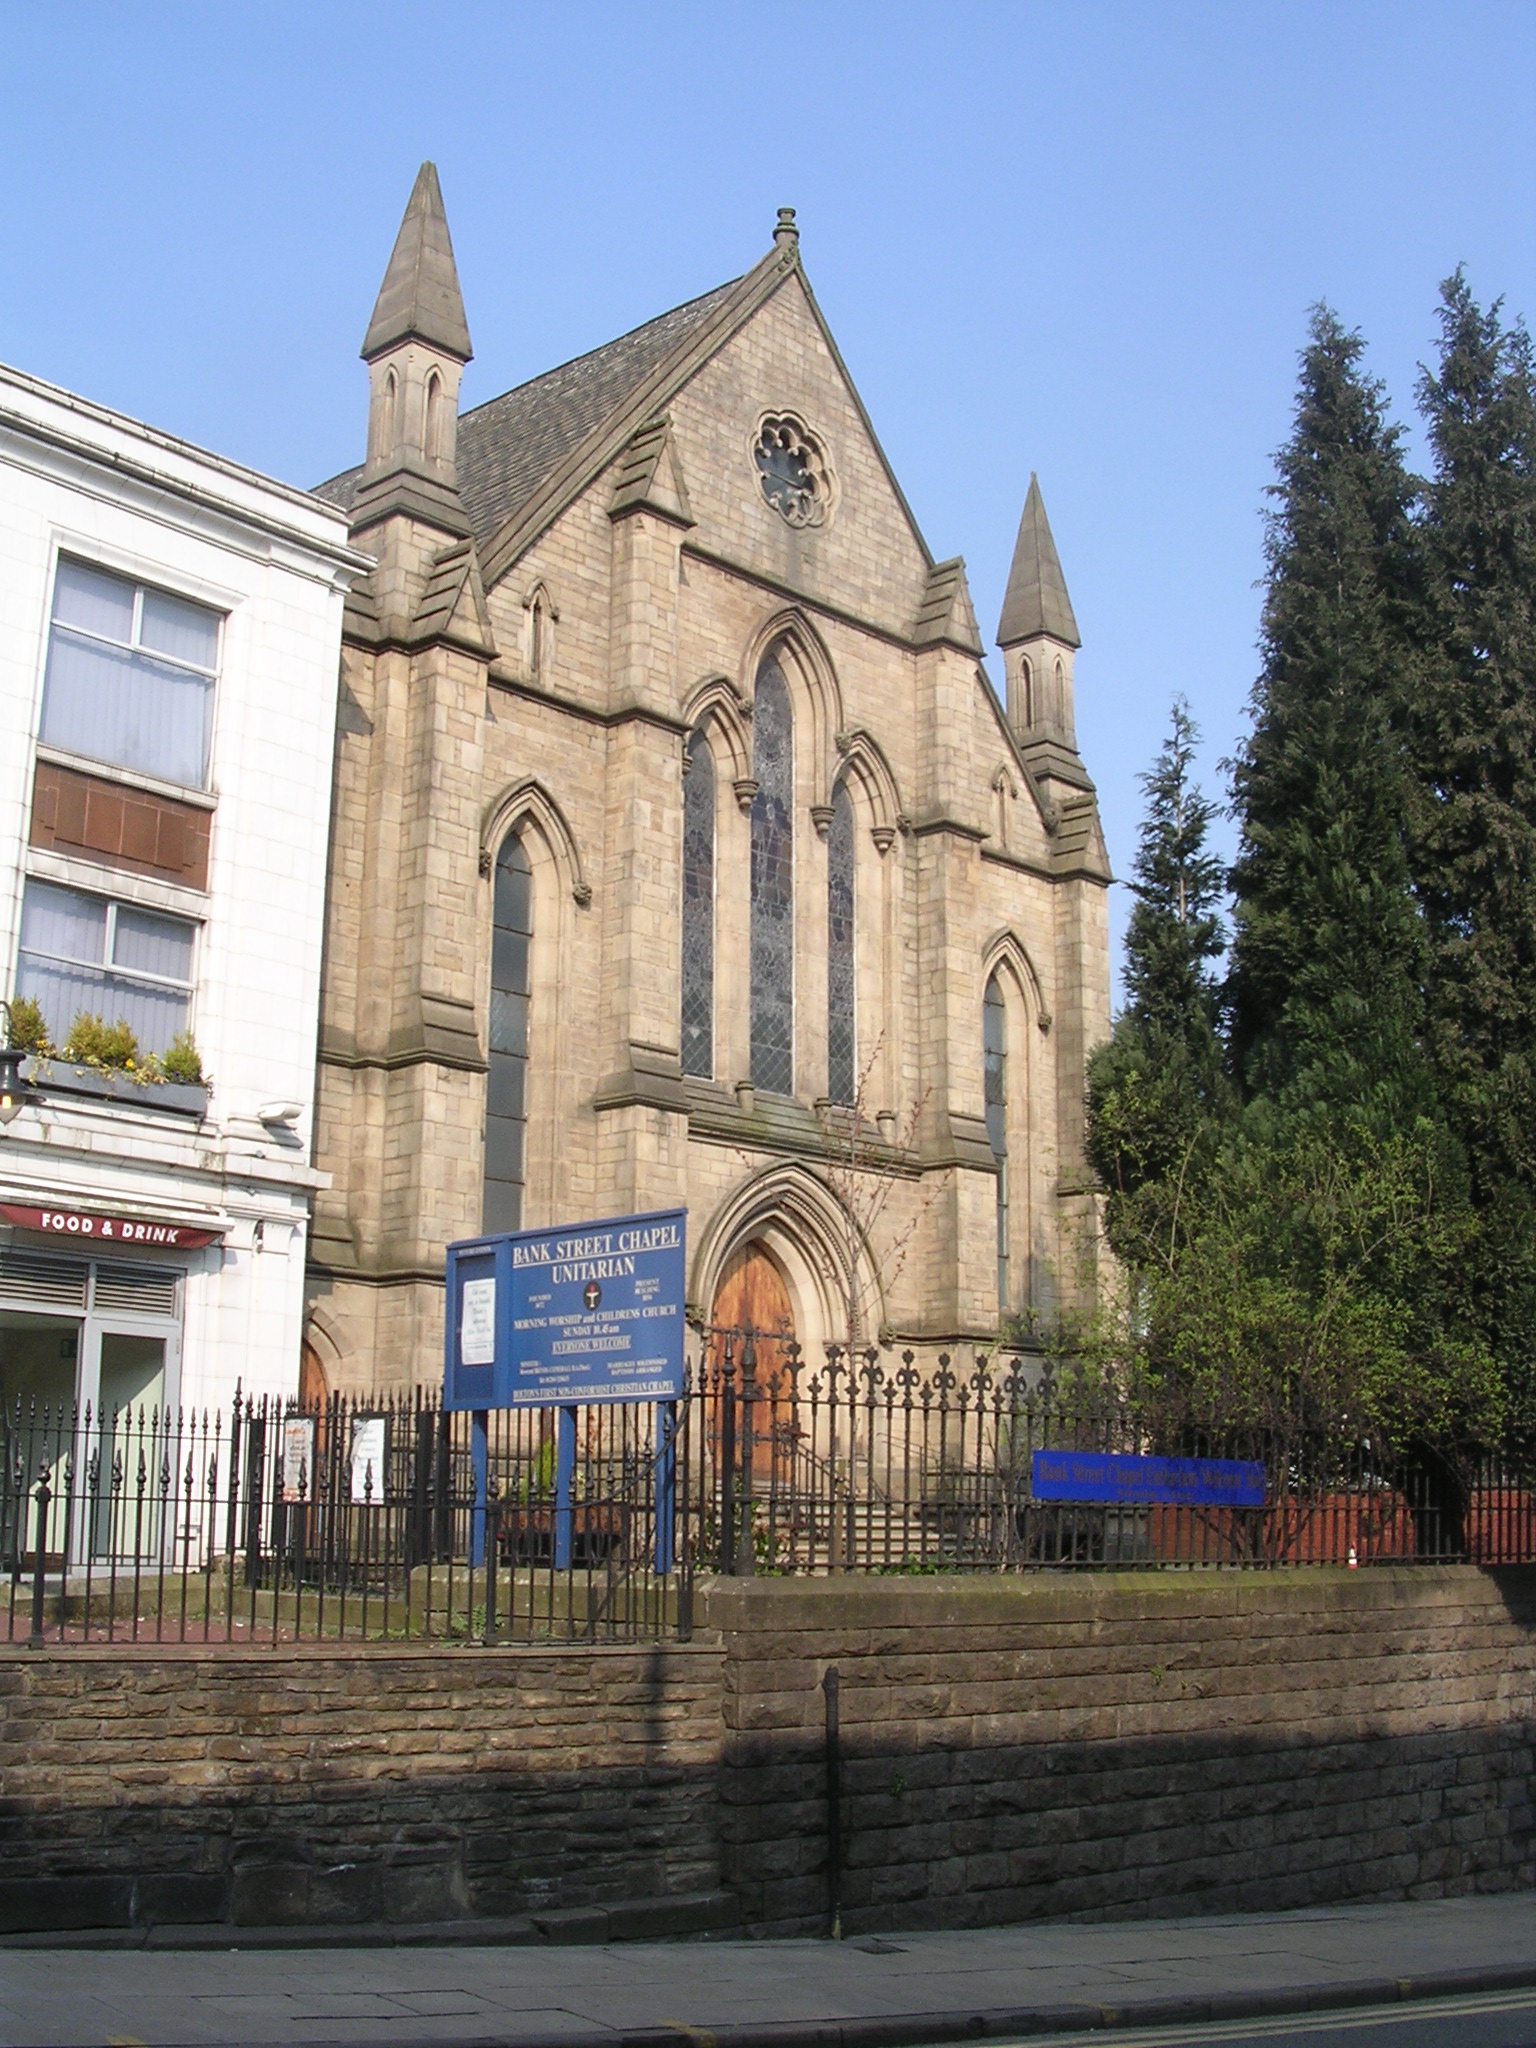 the building is an ancient style church